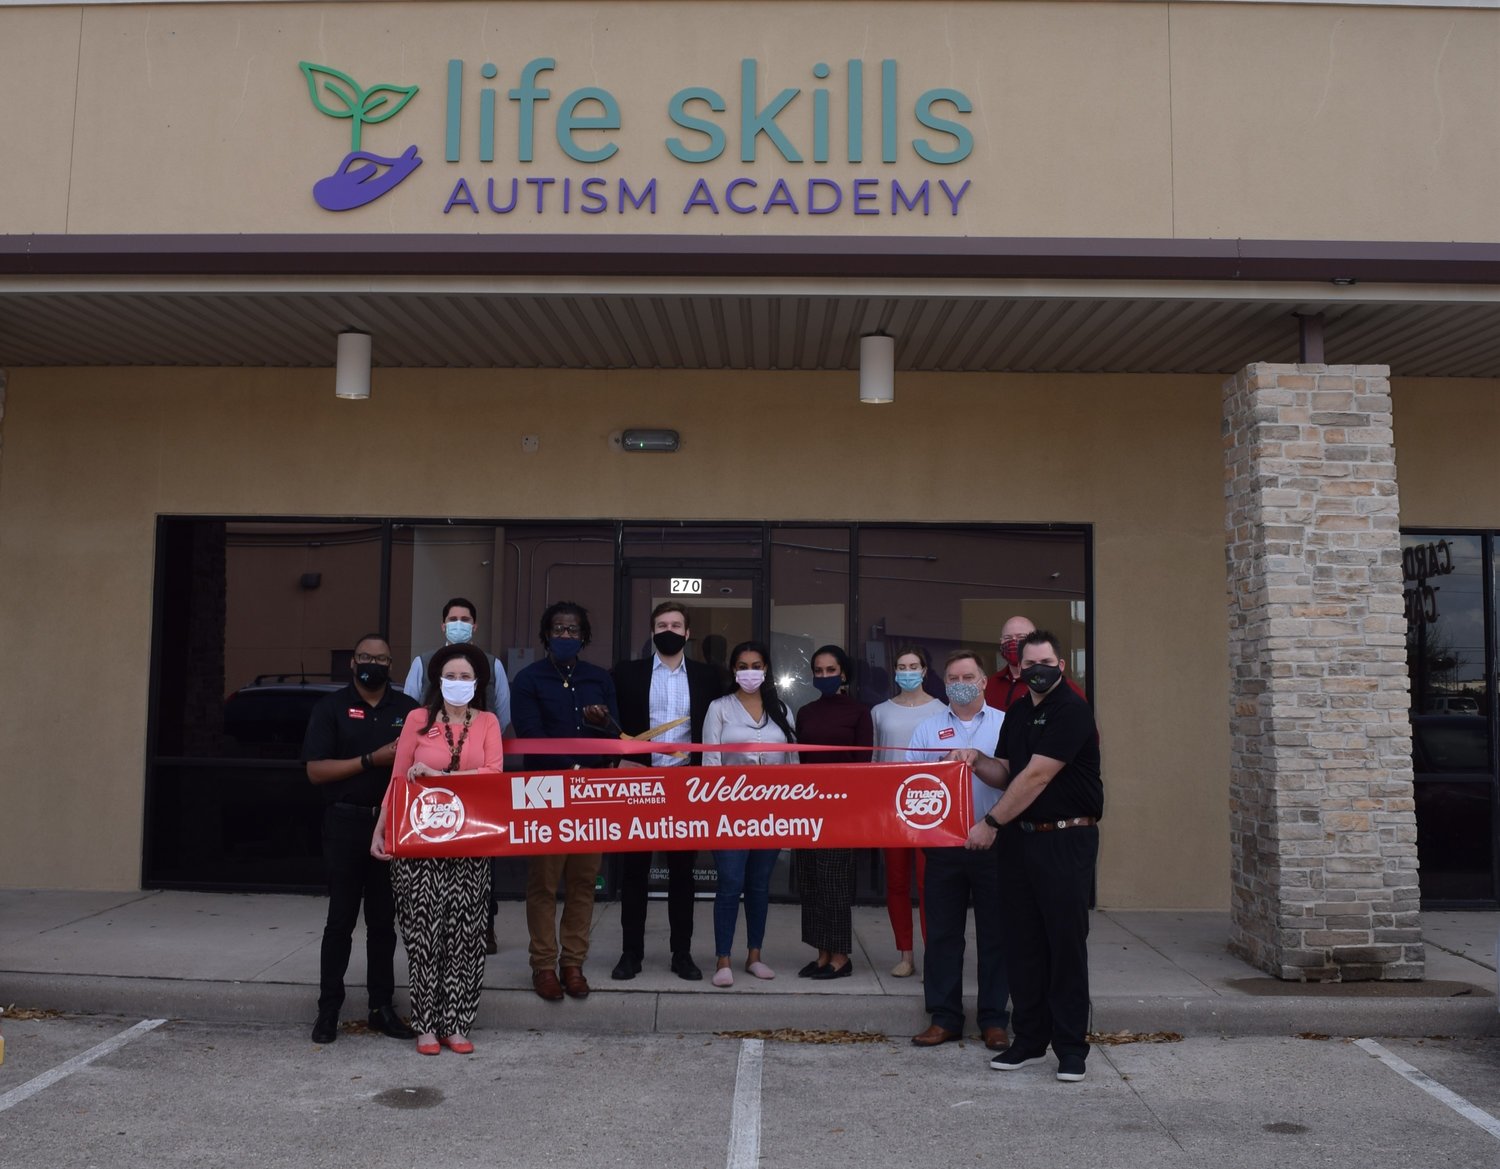 Dehazard Allen (center with scissors), clinical director of Life Skills Autism Academy in Katy is joined by Life Skills Autism Academy program director Nathan Rabens (behind scissors) and members of the Katy Area Chamber of Commerce and other academy staff for the autism clinic’s March 9 ribbon cutting.